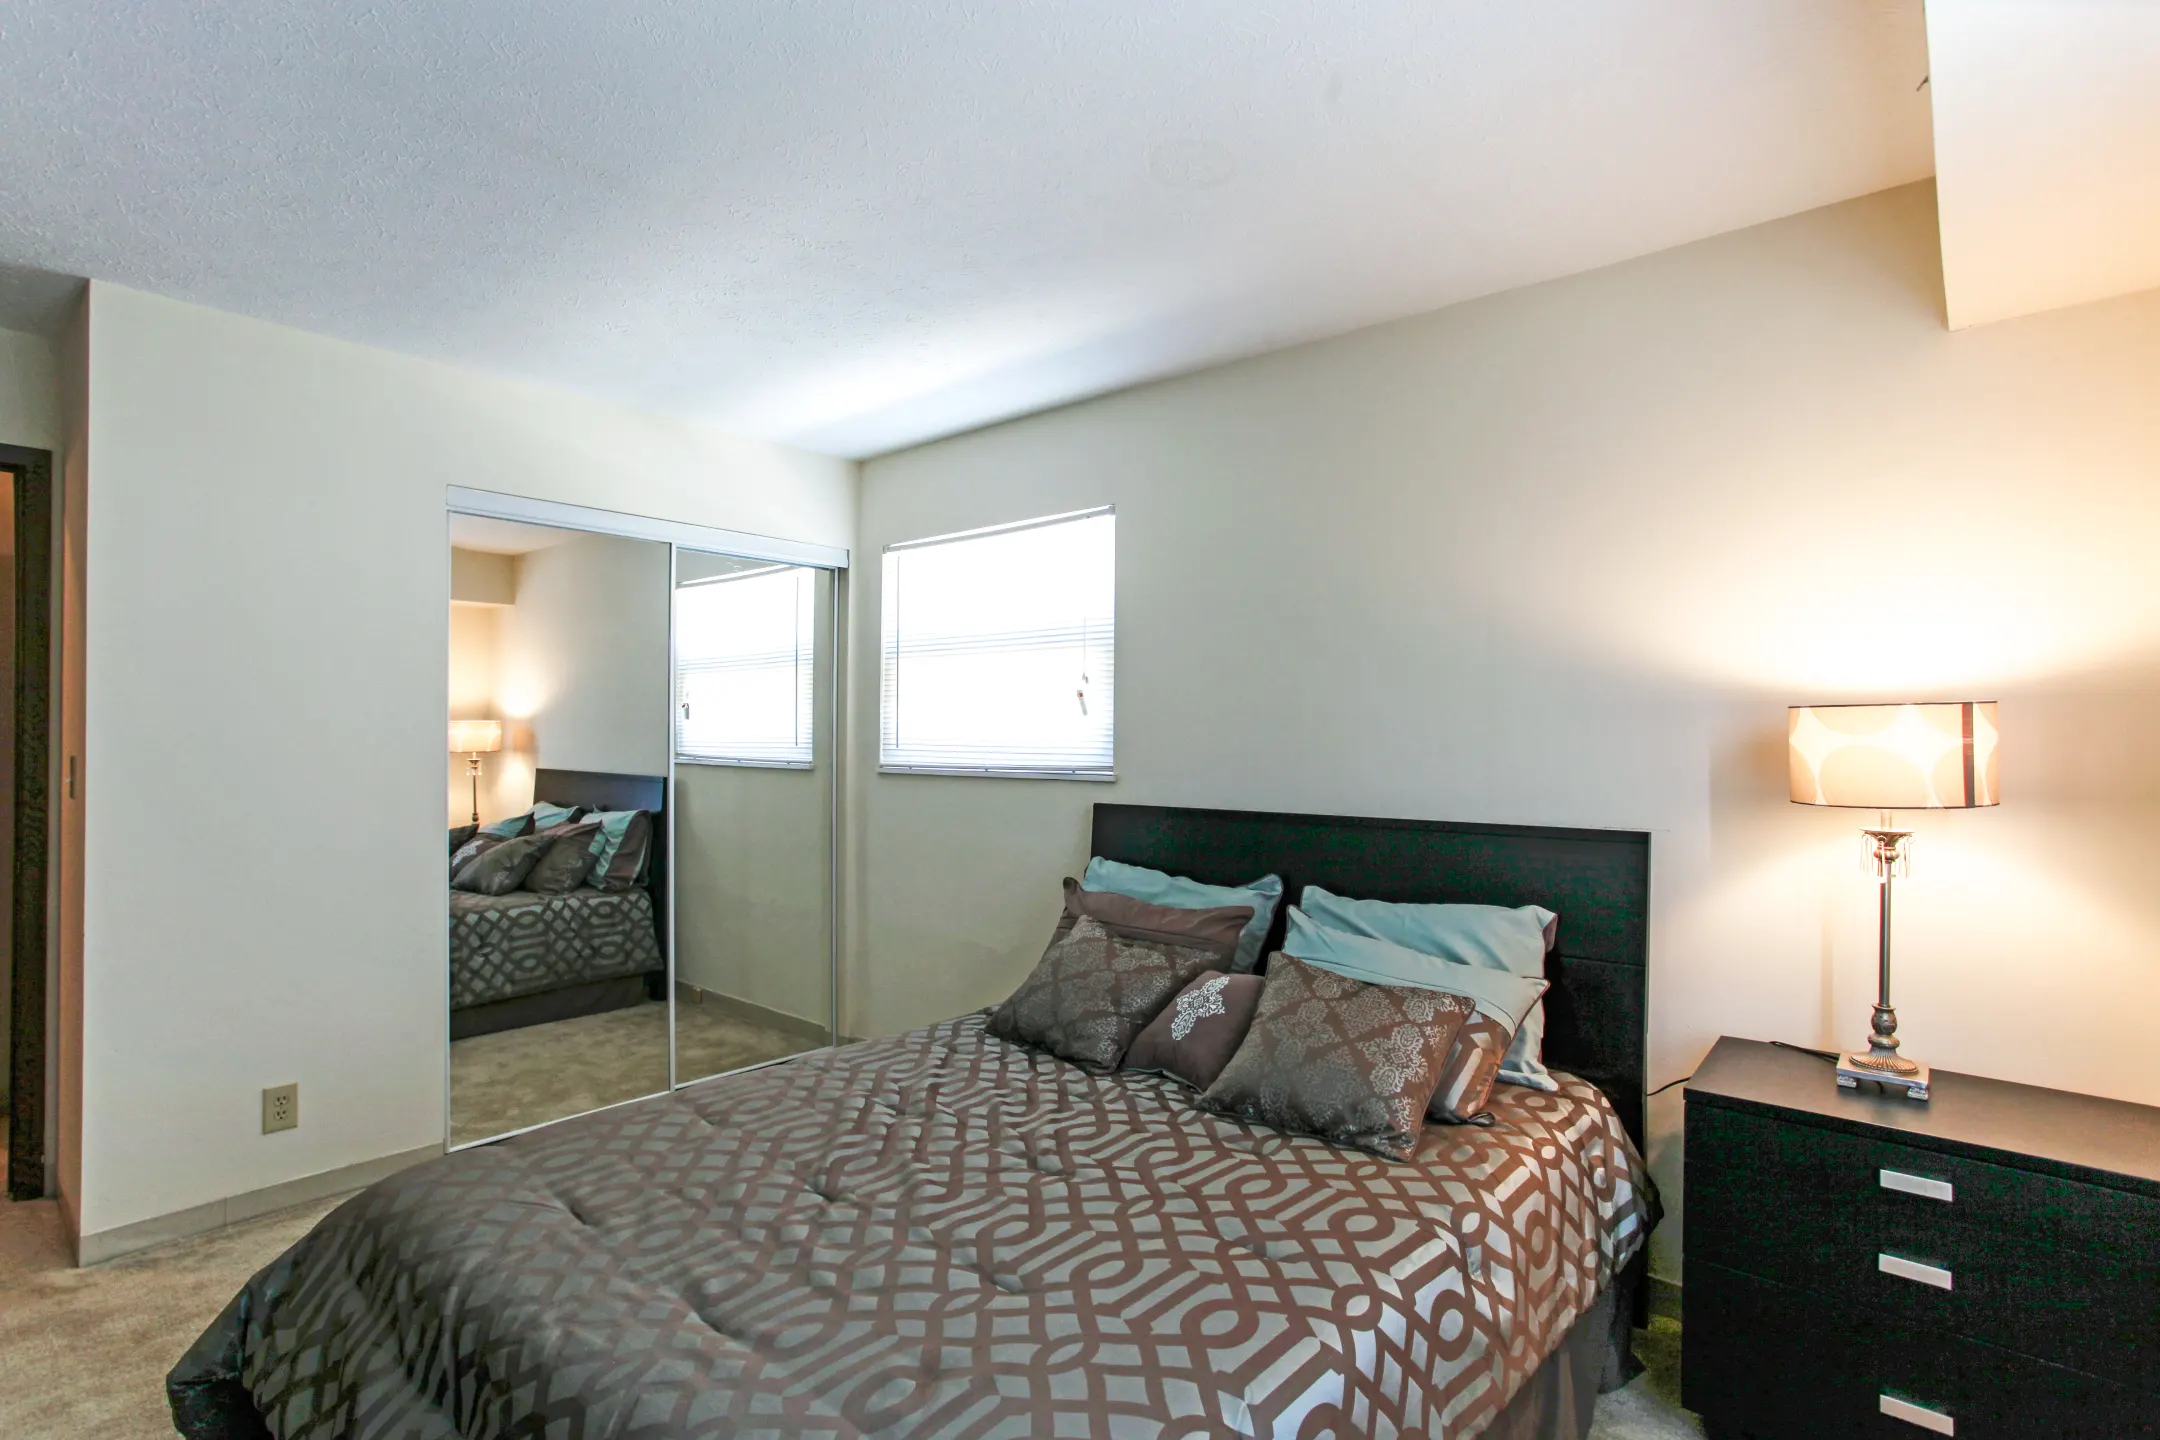 Bedroom - Bay Club Apartments - Willowick, OH